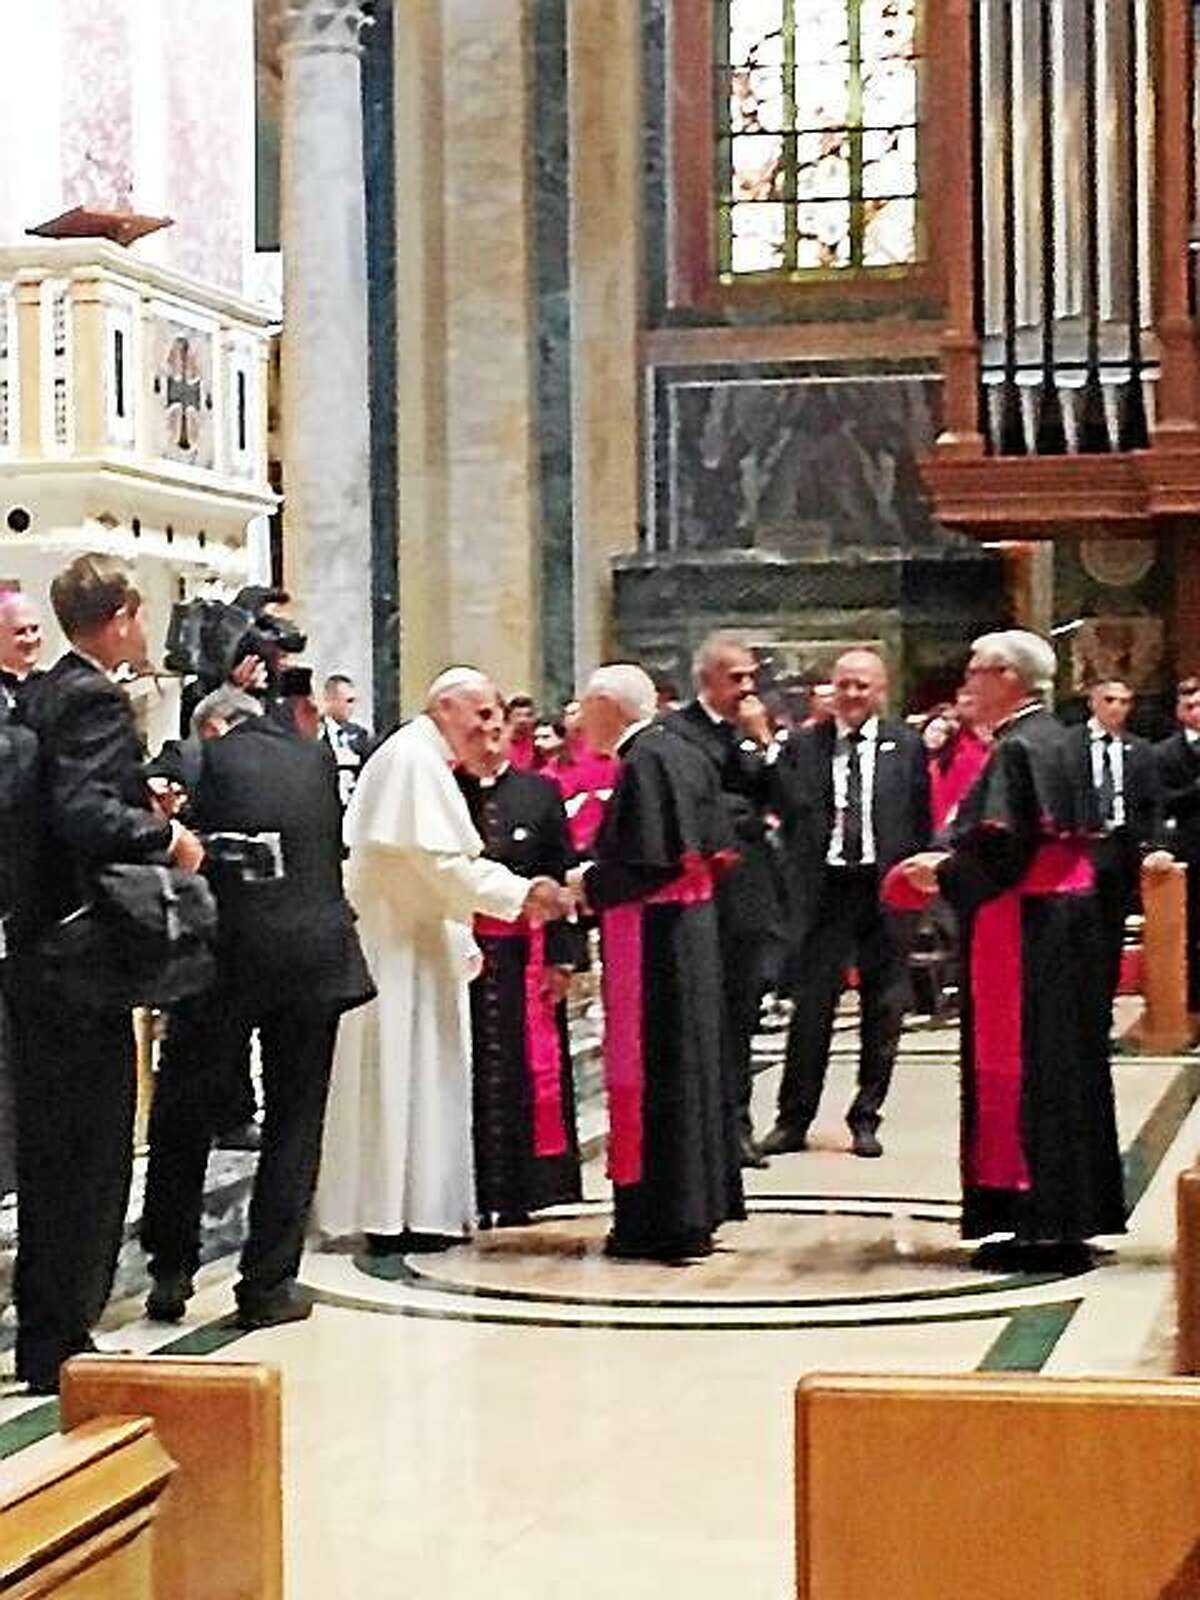 Archbishop Leonard P. Blair of the Archdiocese of Hartford being presented to Pope Francis at the Cathedral of St. Matthew the Apostle in Washington, D.C. during the Popeís meeting with U.S. bishops last Wednesday.